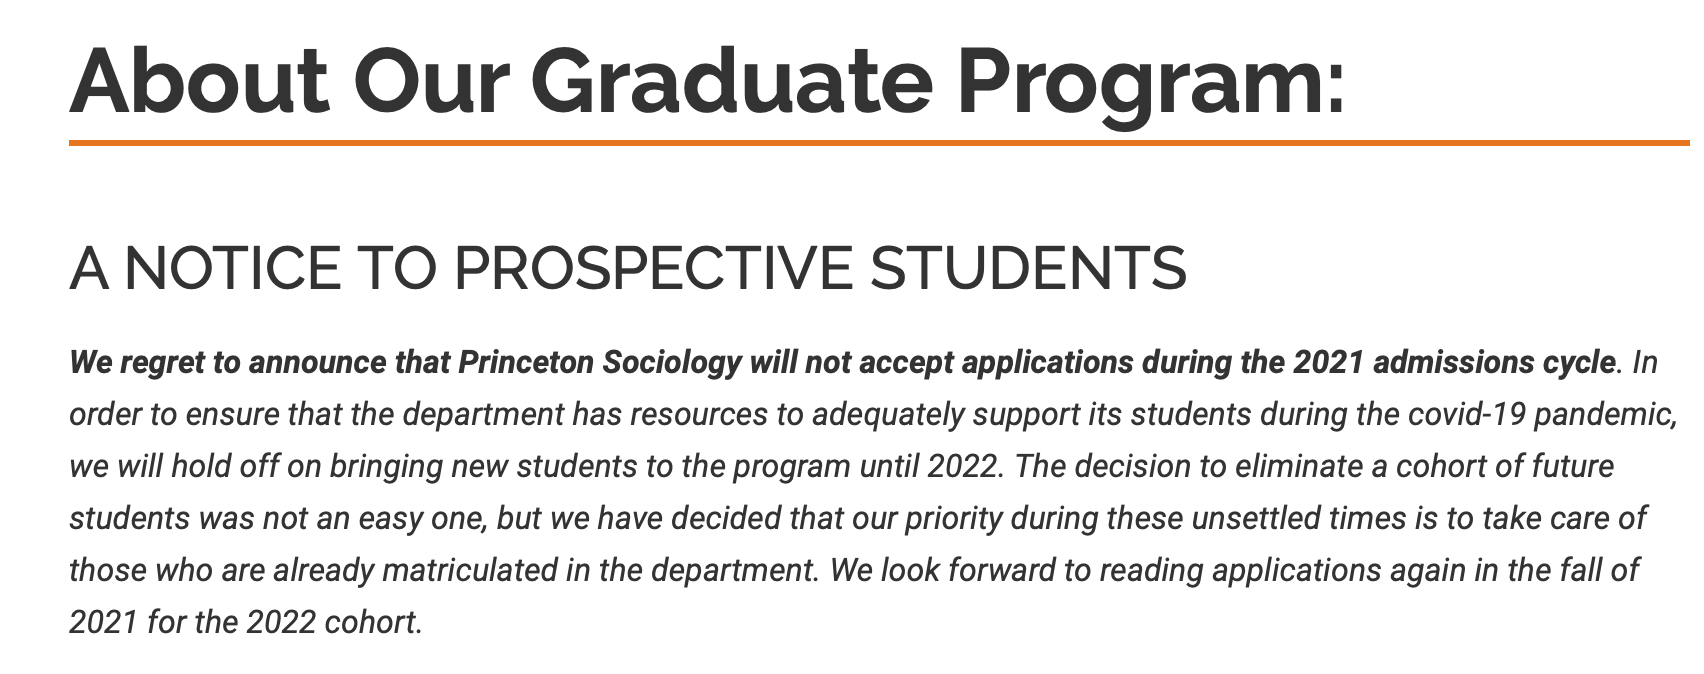 A NOTICE TO PROSPECTIVE STUDENTS We regret to announce that Princeton Sociology will not accept applications during the 2021 admissions cycle. In order to ensure that the department has resources to adequately support its students during the covid-19 pandemic, we will hold off on bringing new students to the program until 2022. The decision to eliminate a cohort of future students was not an easy one, but we have decided that our priority during these unsettled times is to take care of those who are already matriculated in the department. We look forward to reading applications again in the fall of 2021 for the 2022 cohort.